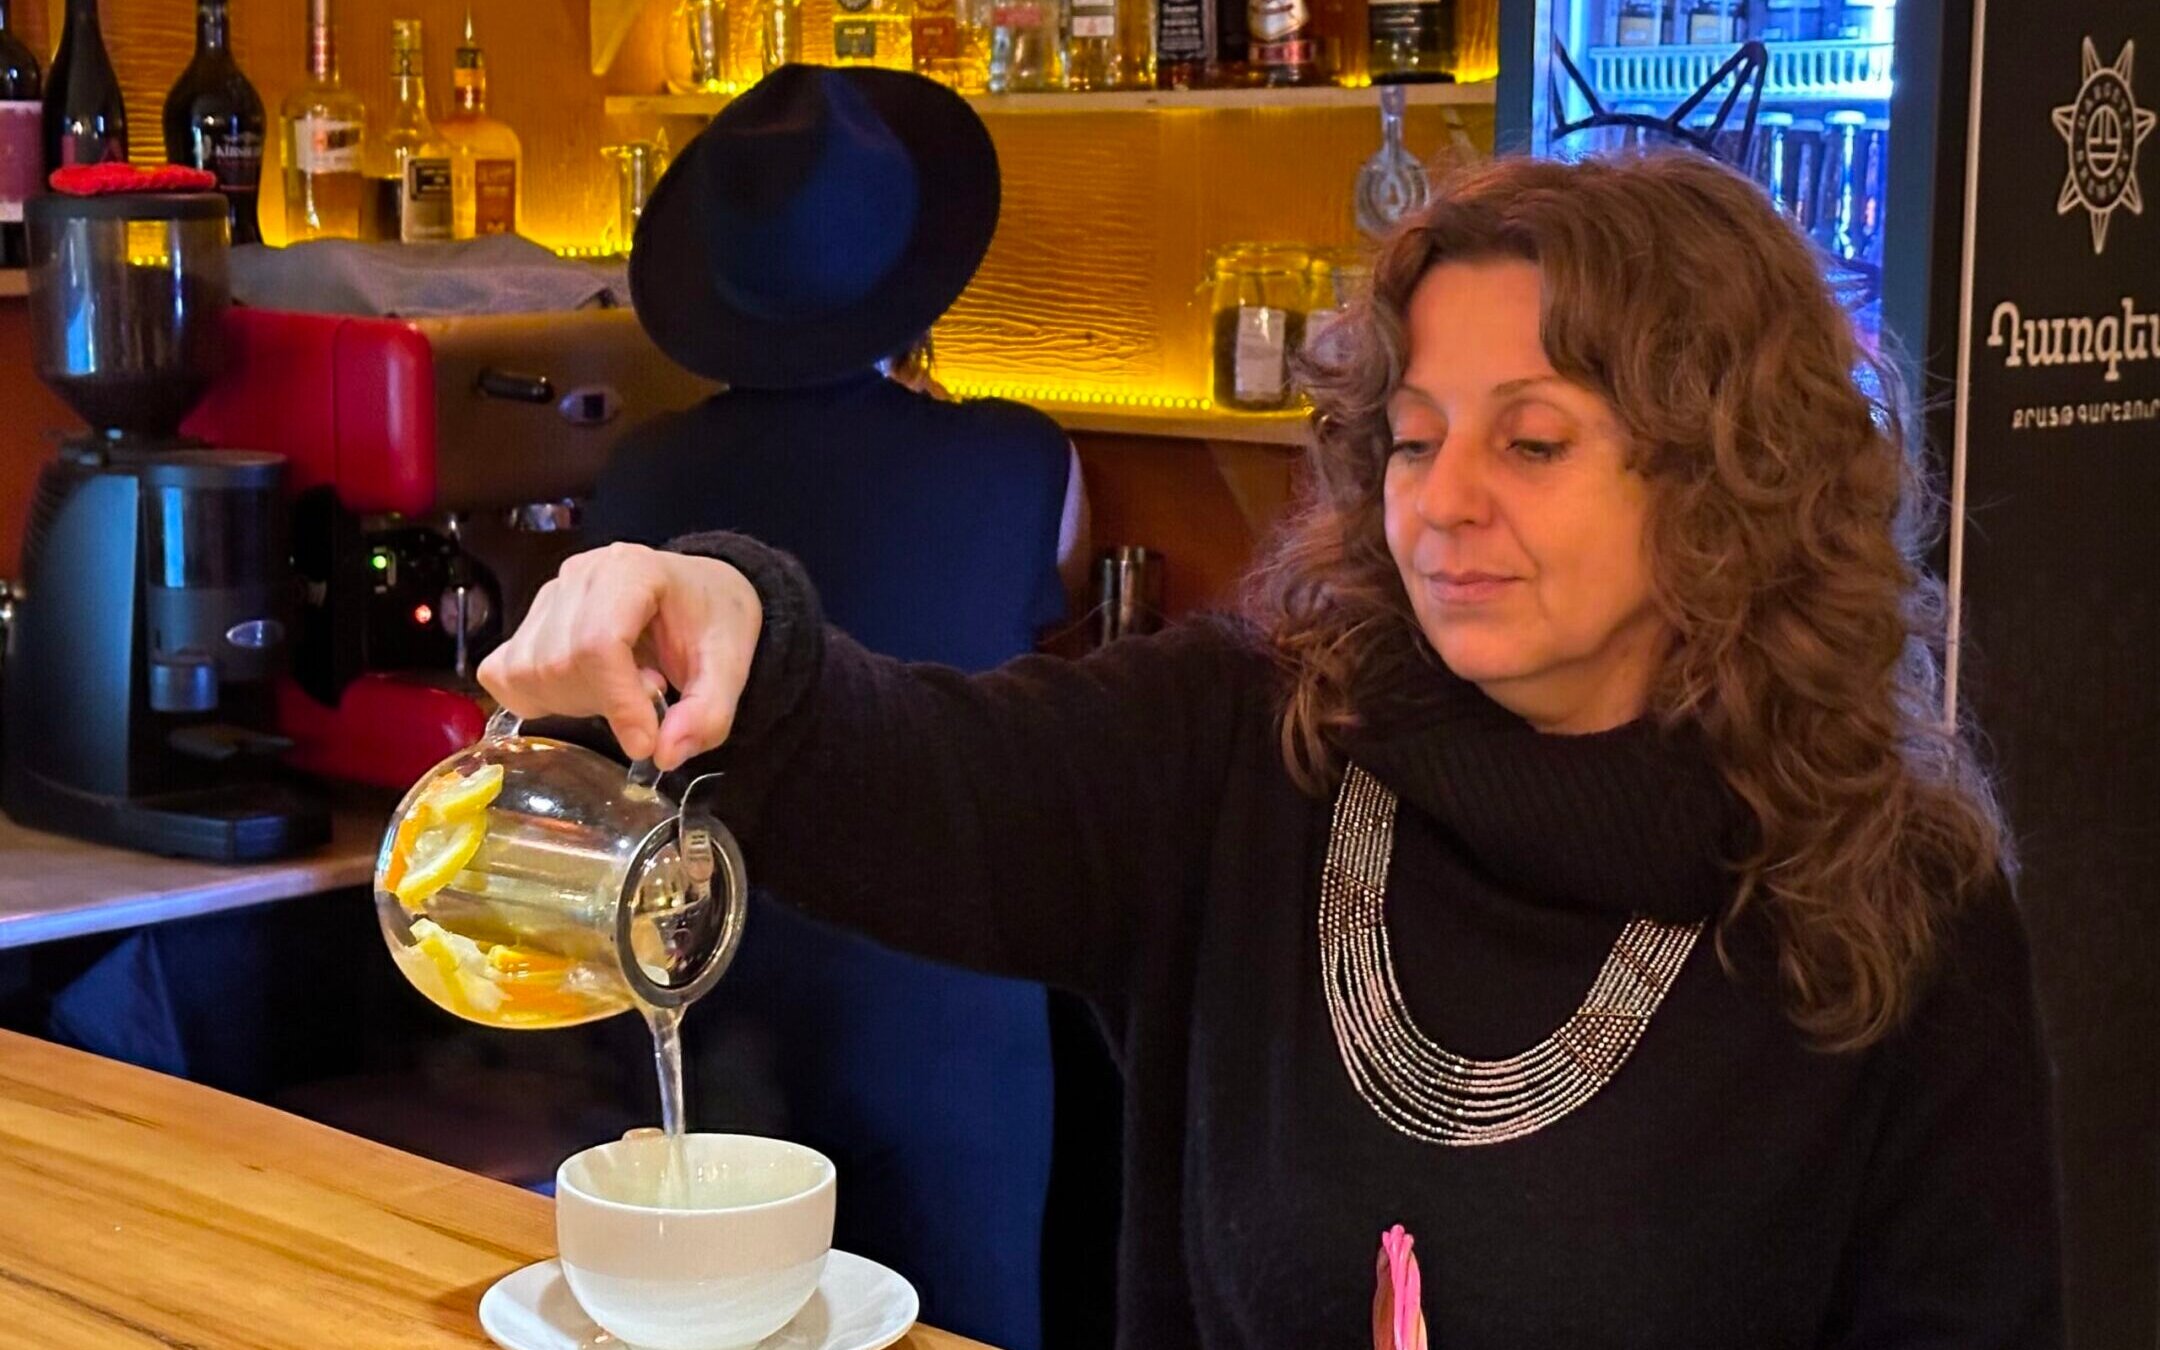 Julia Kislev, a Crimean Jew who’s been living in Armenia since 2016, pours a cup of tea at Mama Jan, the café she owns in Yerevan. Mama Jan has become the unofficial gathering place for Russian Jews who have settled here since Russia invaded Ukraine two years ago. (Larry Luxner)